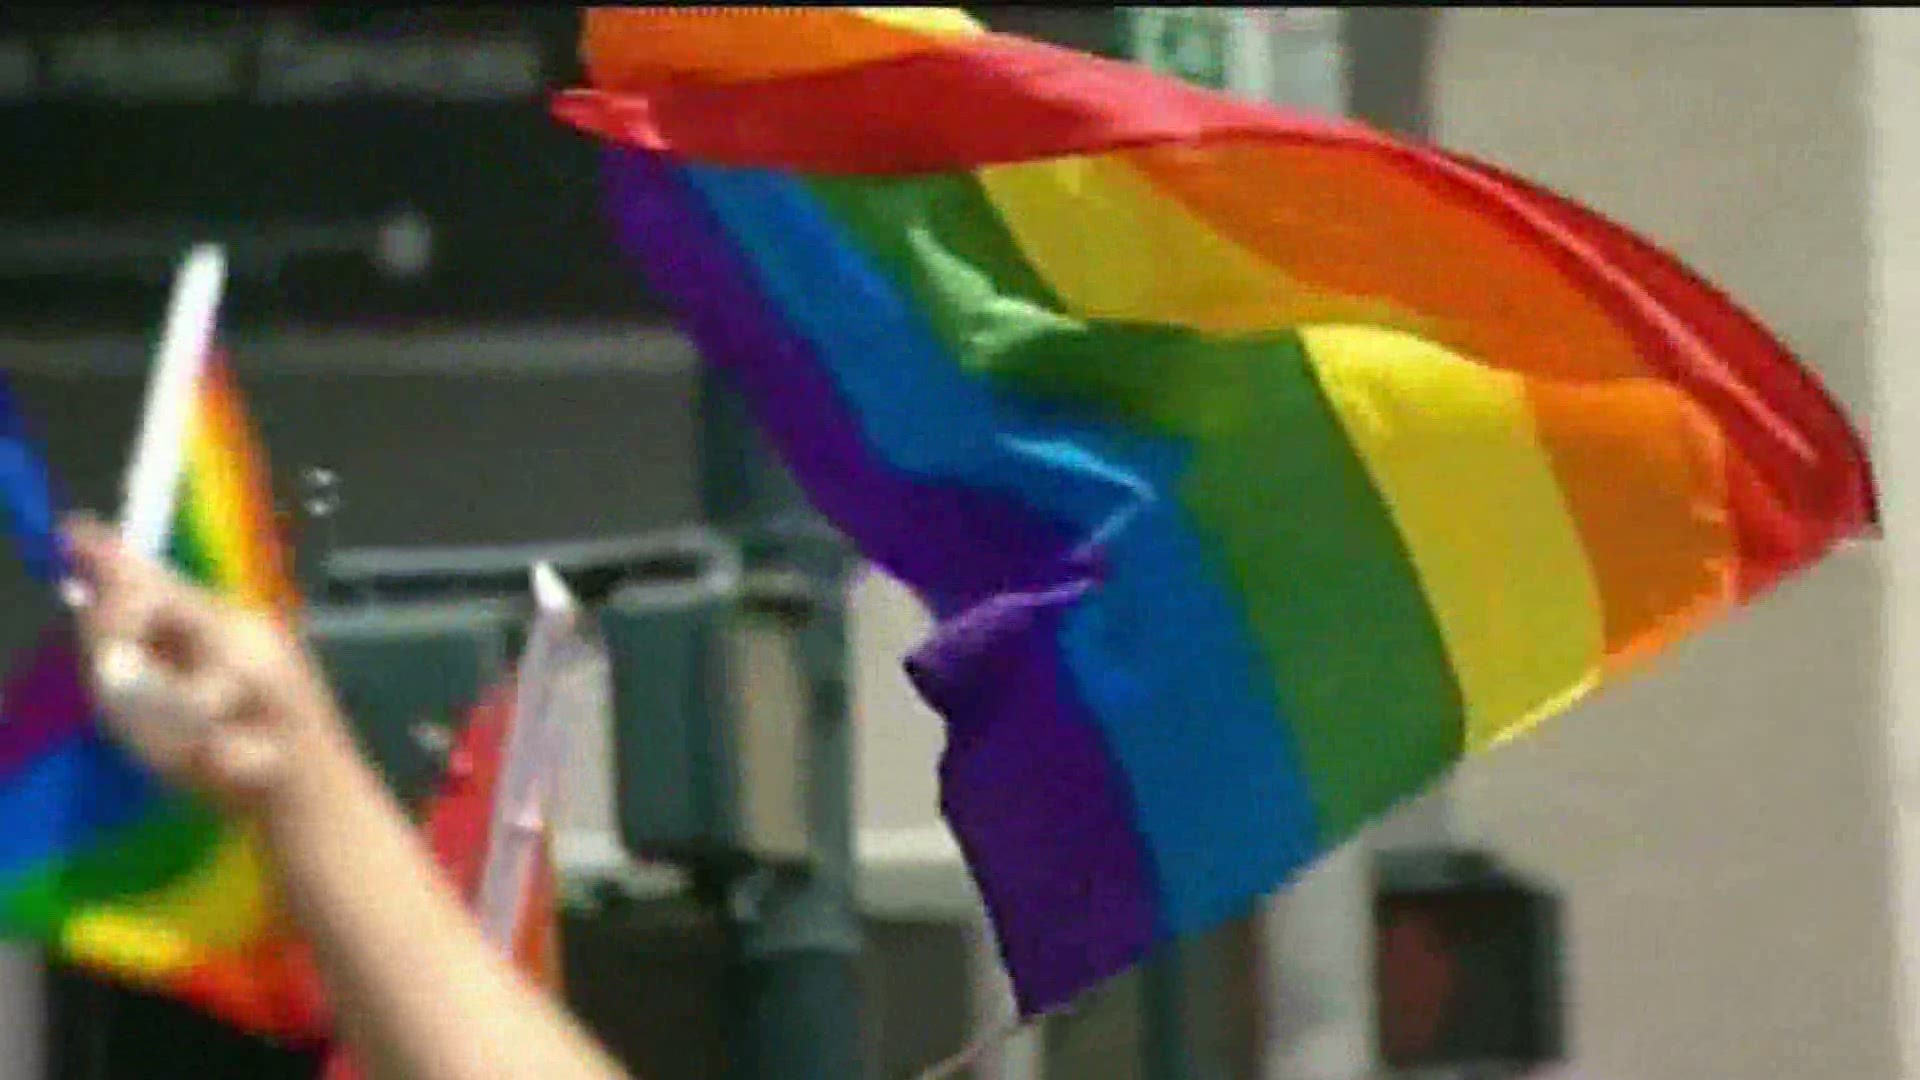 Davenport is First Iowa City to Ban Gay Conversion Therapy